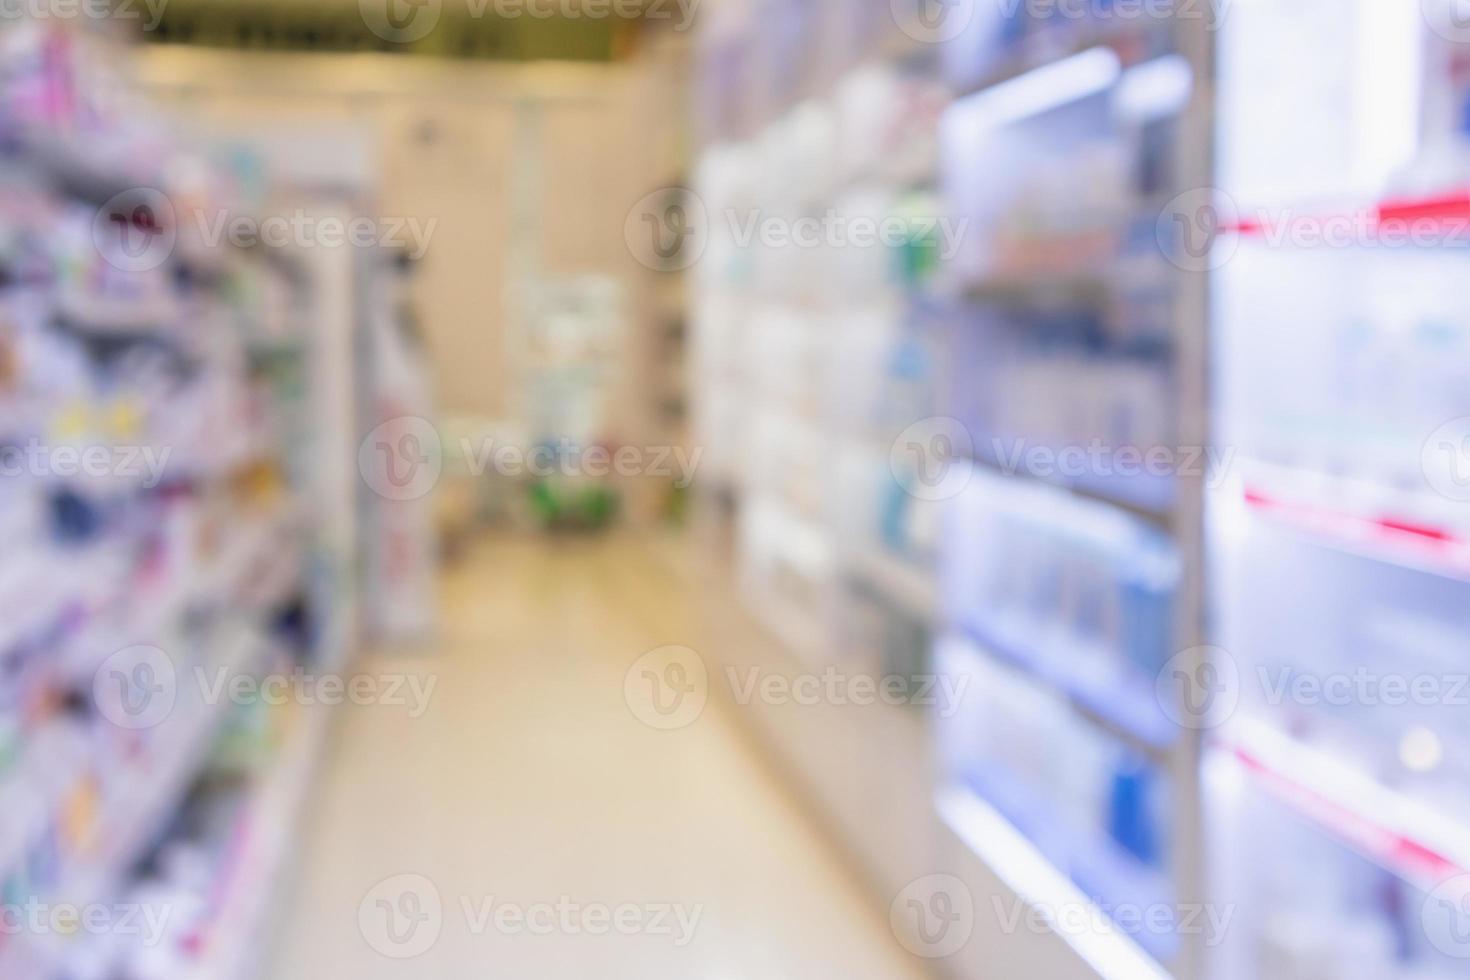 Pharmacy drugstore blur abstract background with medicine and vitamin product on shelves photo